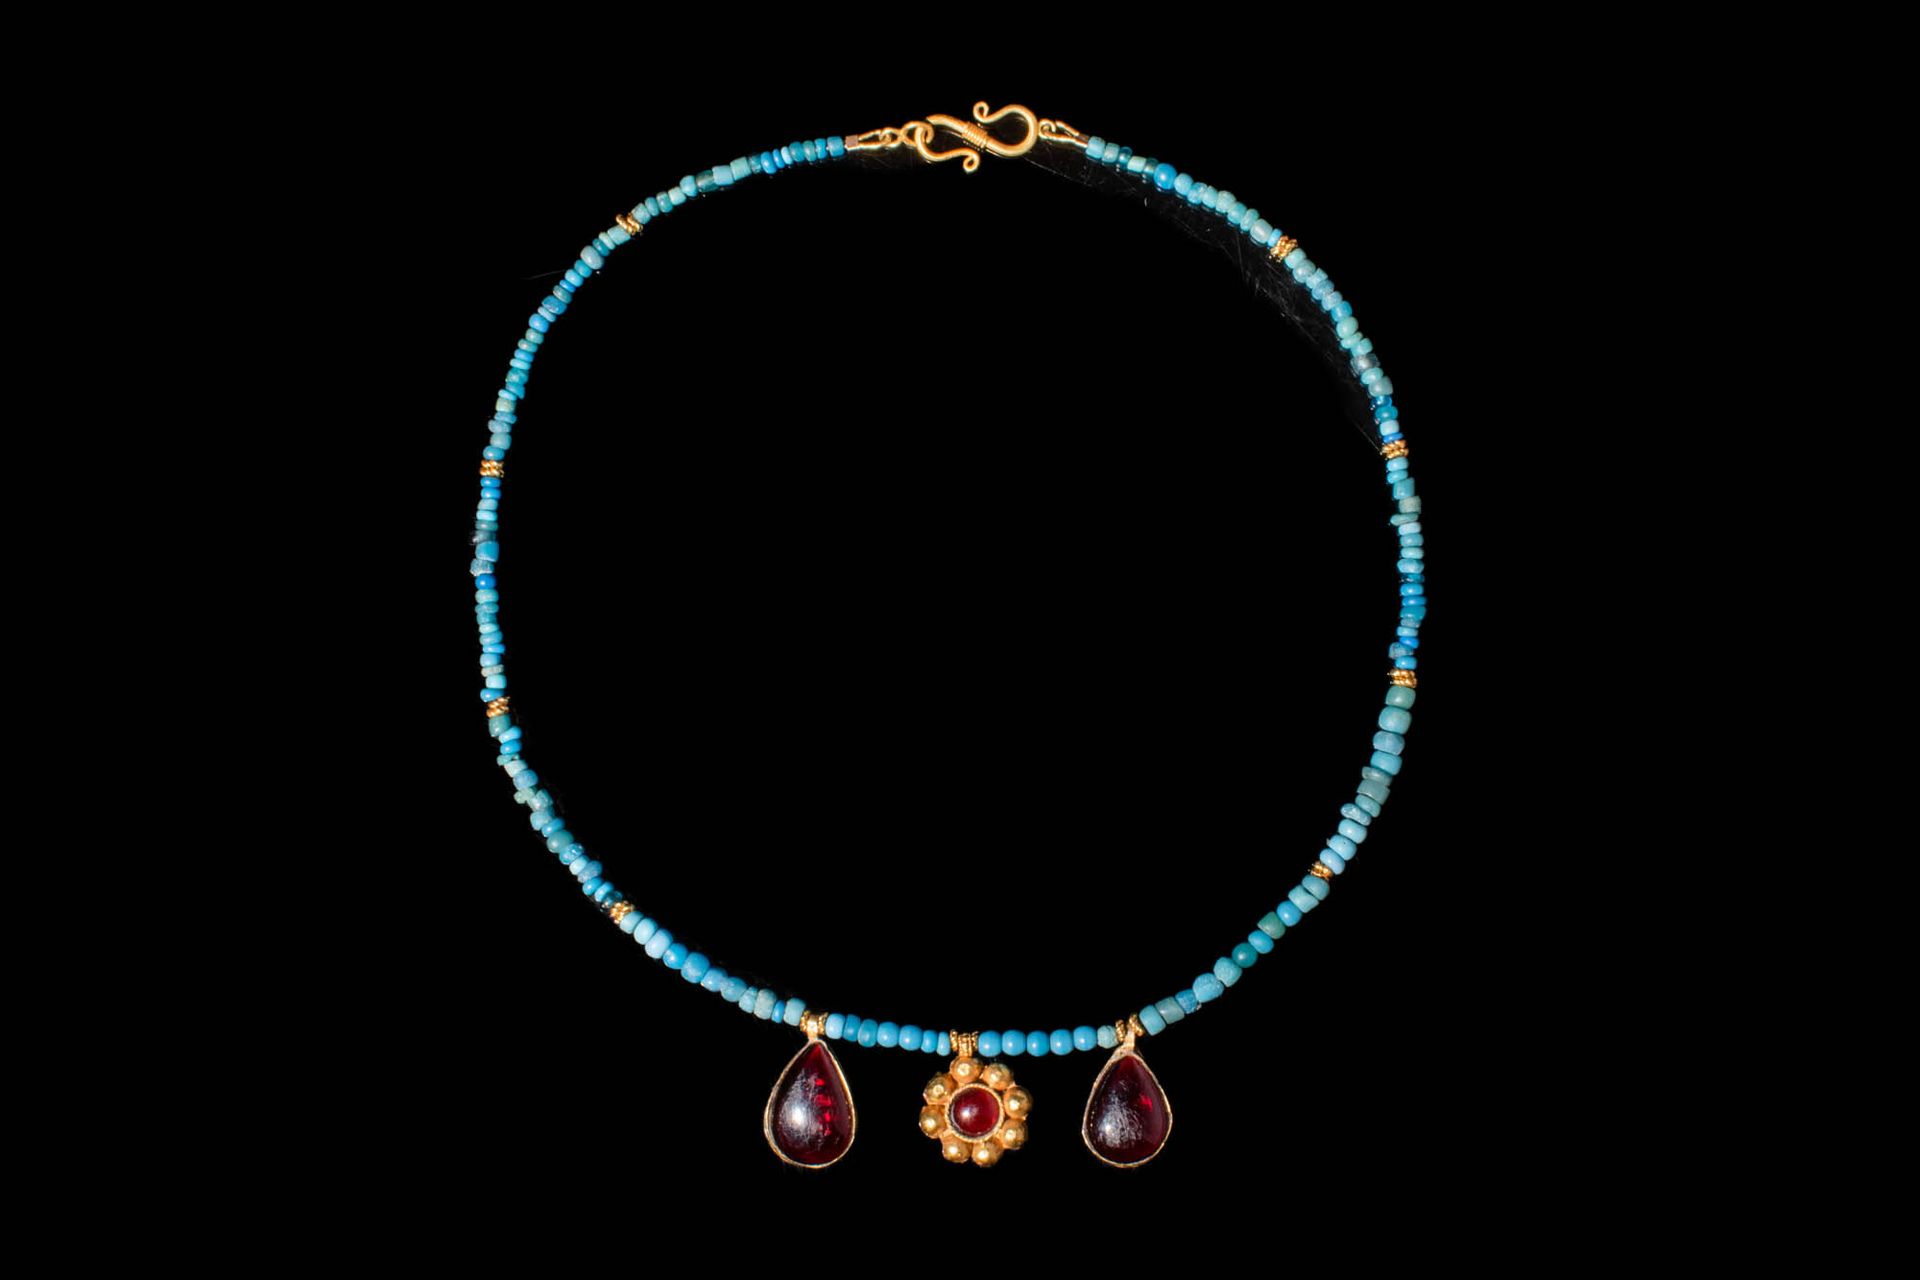 RARE WESTERN ASIATIC TURQUOISE AND GOLD NECKLACE Ca. 1200 - 800 AV.
Collier en t&hellip;